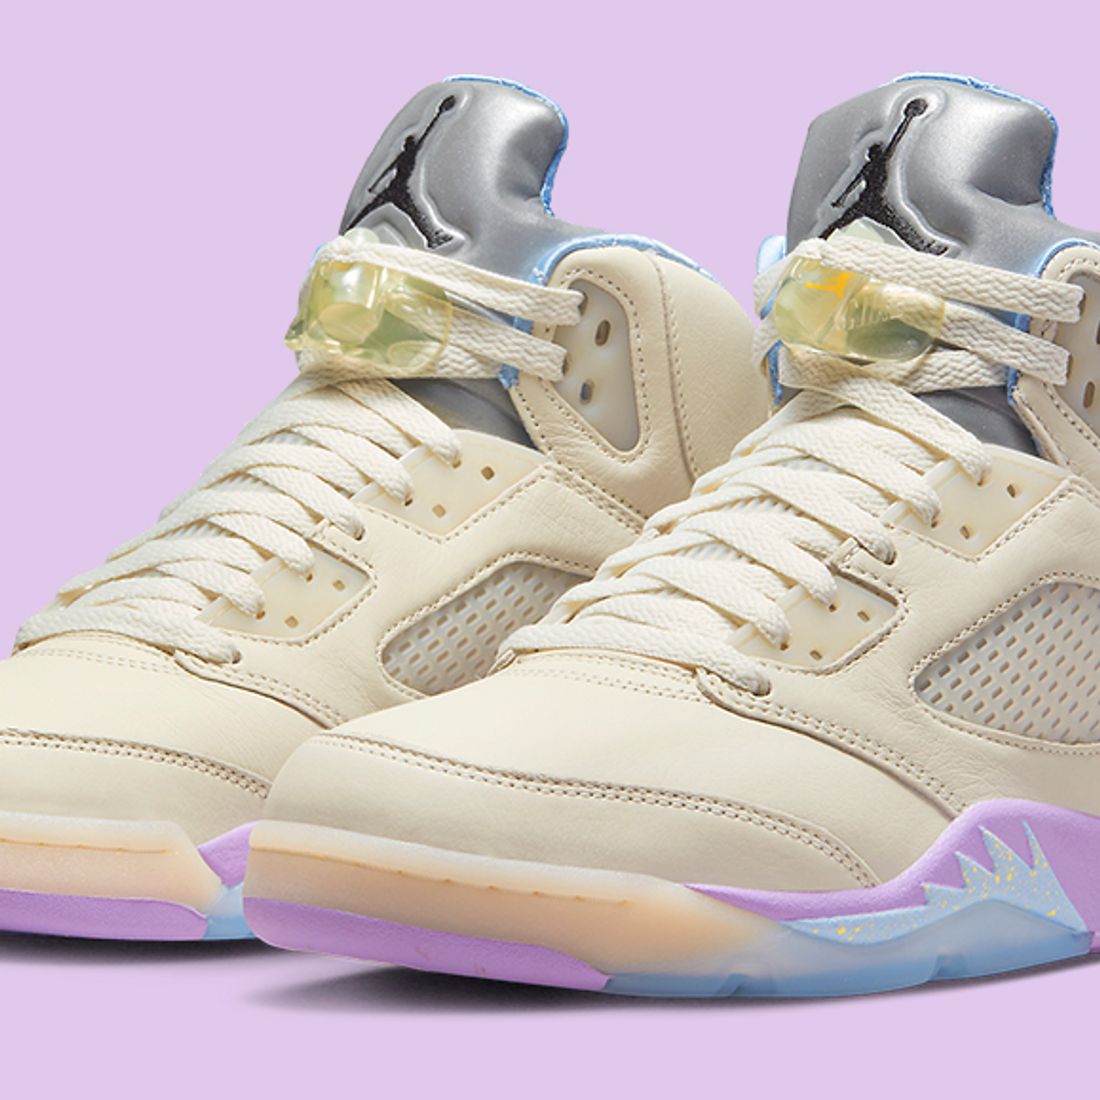 Are You Looking Forward To The Off-White x Air Jordan 5? •